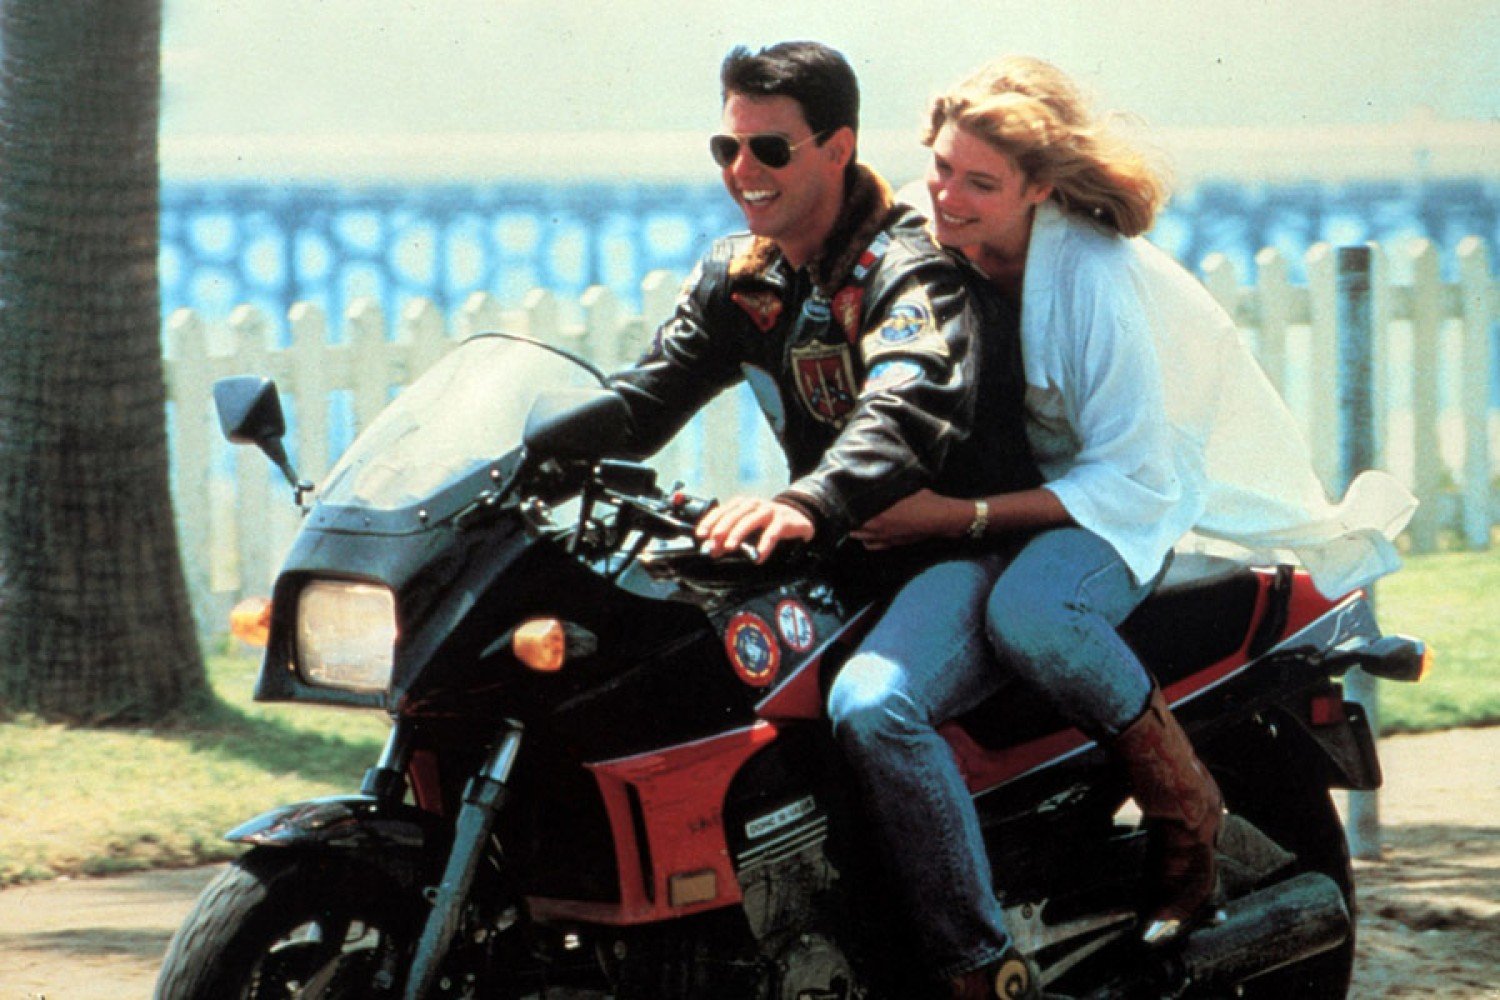 does tom cruise drive the motorcycle in top gun